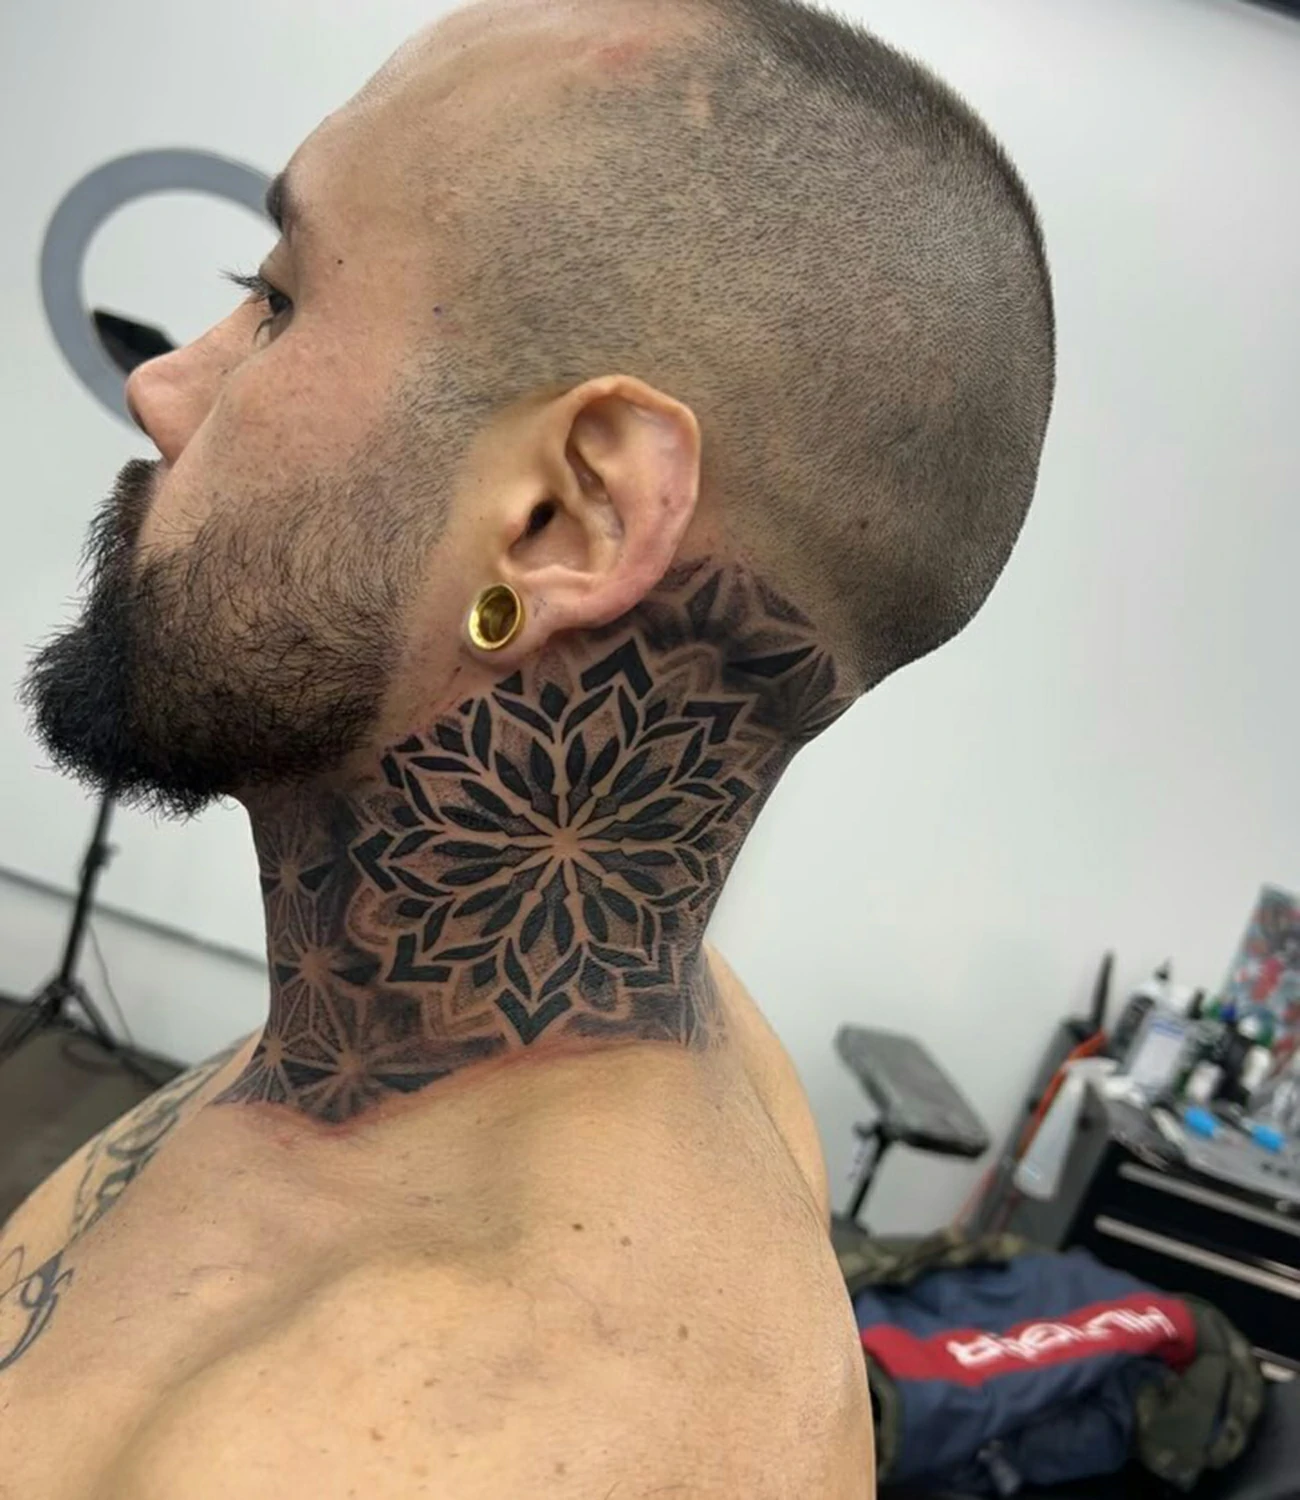 Geometric Neck Tattoo: Geometric neck tattoos feature symmetrical shapes and patterns that enhance the natural lines of the neck, symbolizing individuality and courage.